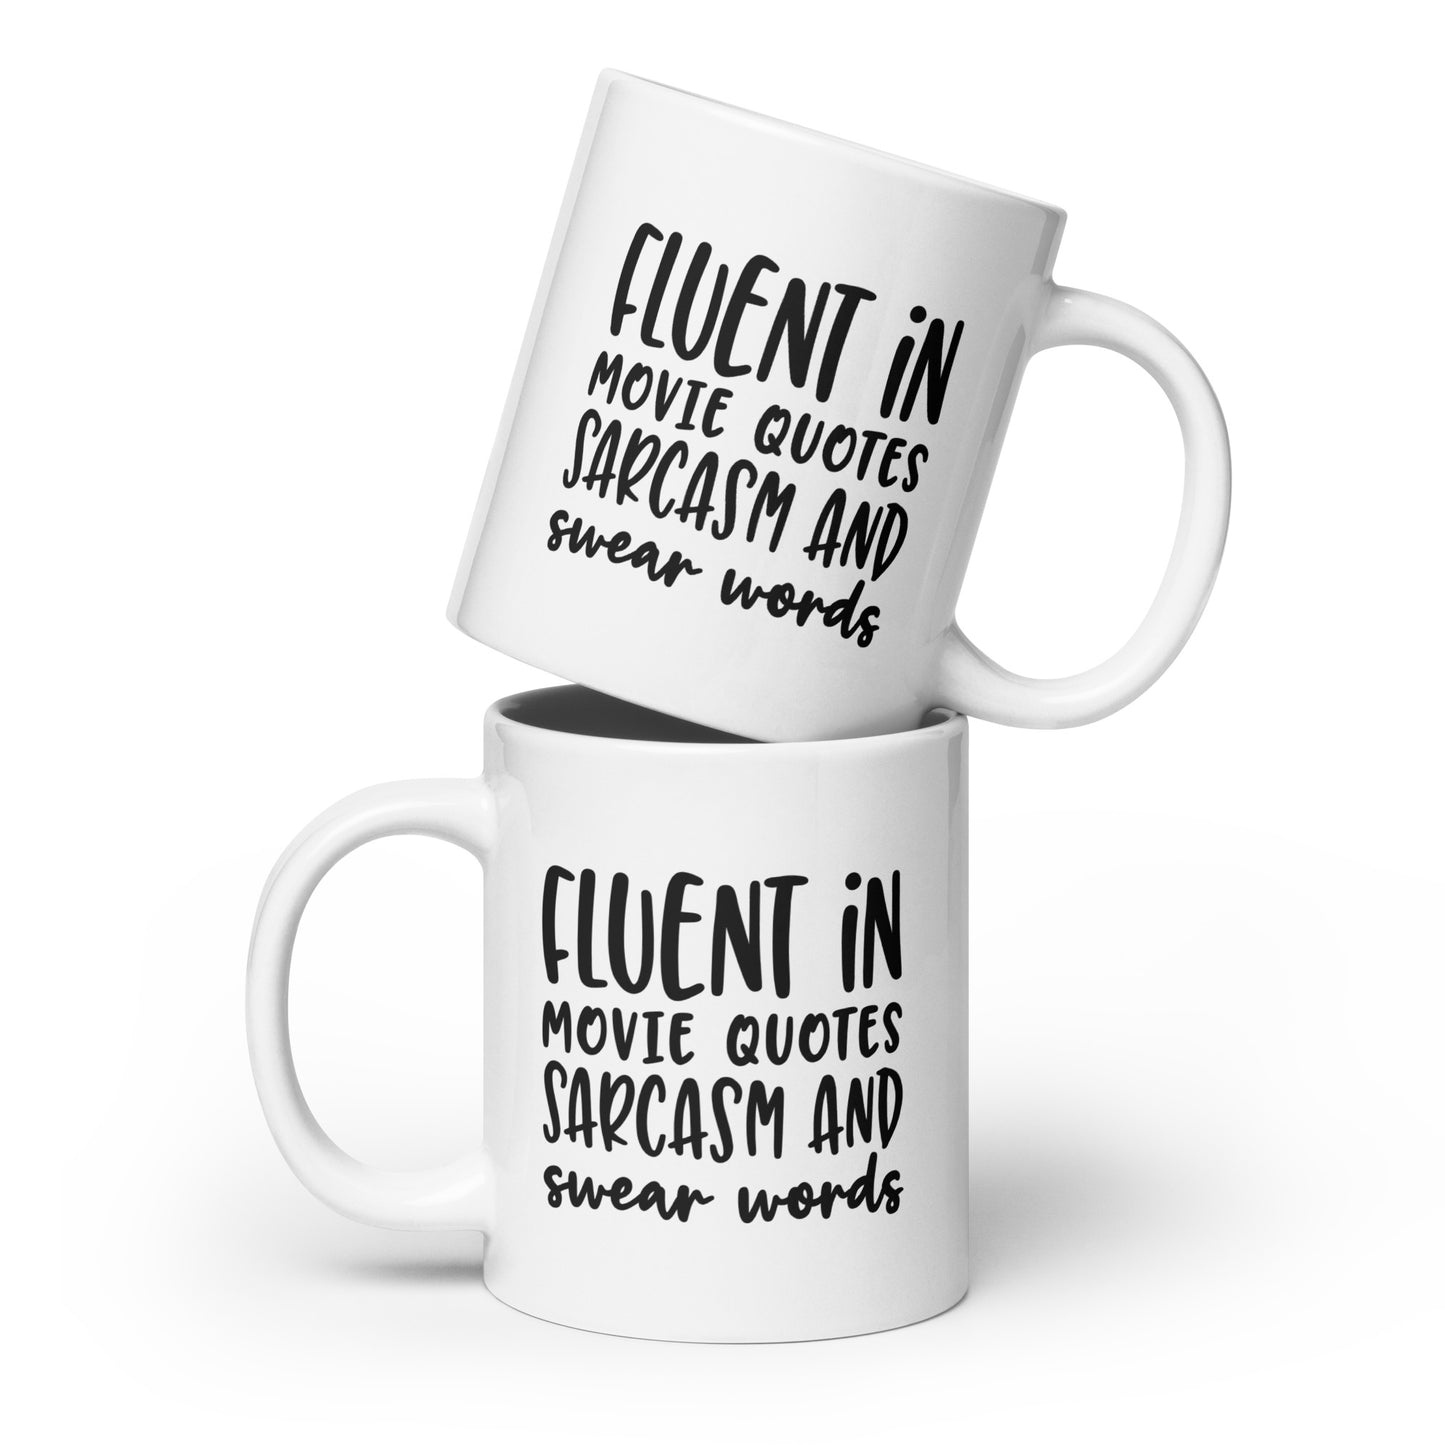 Fluent in Movie Quotes, Sarcasm and Swear Words Coffee Mug